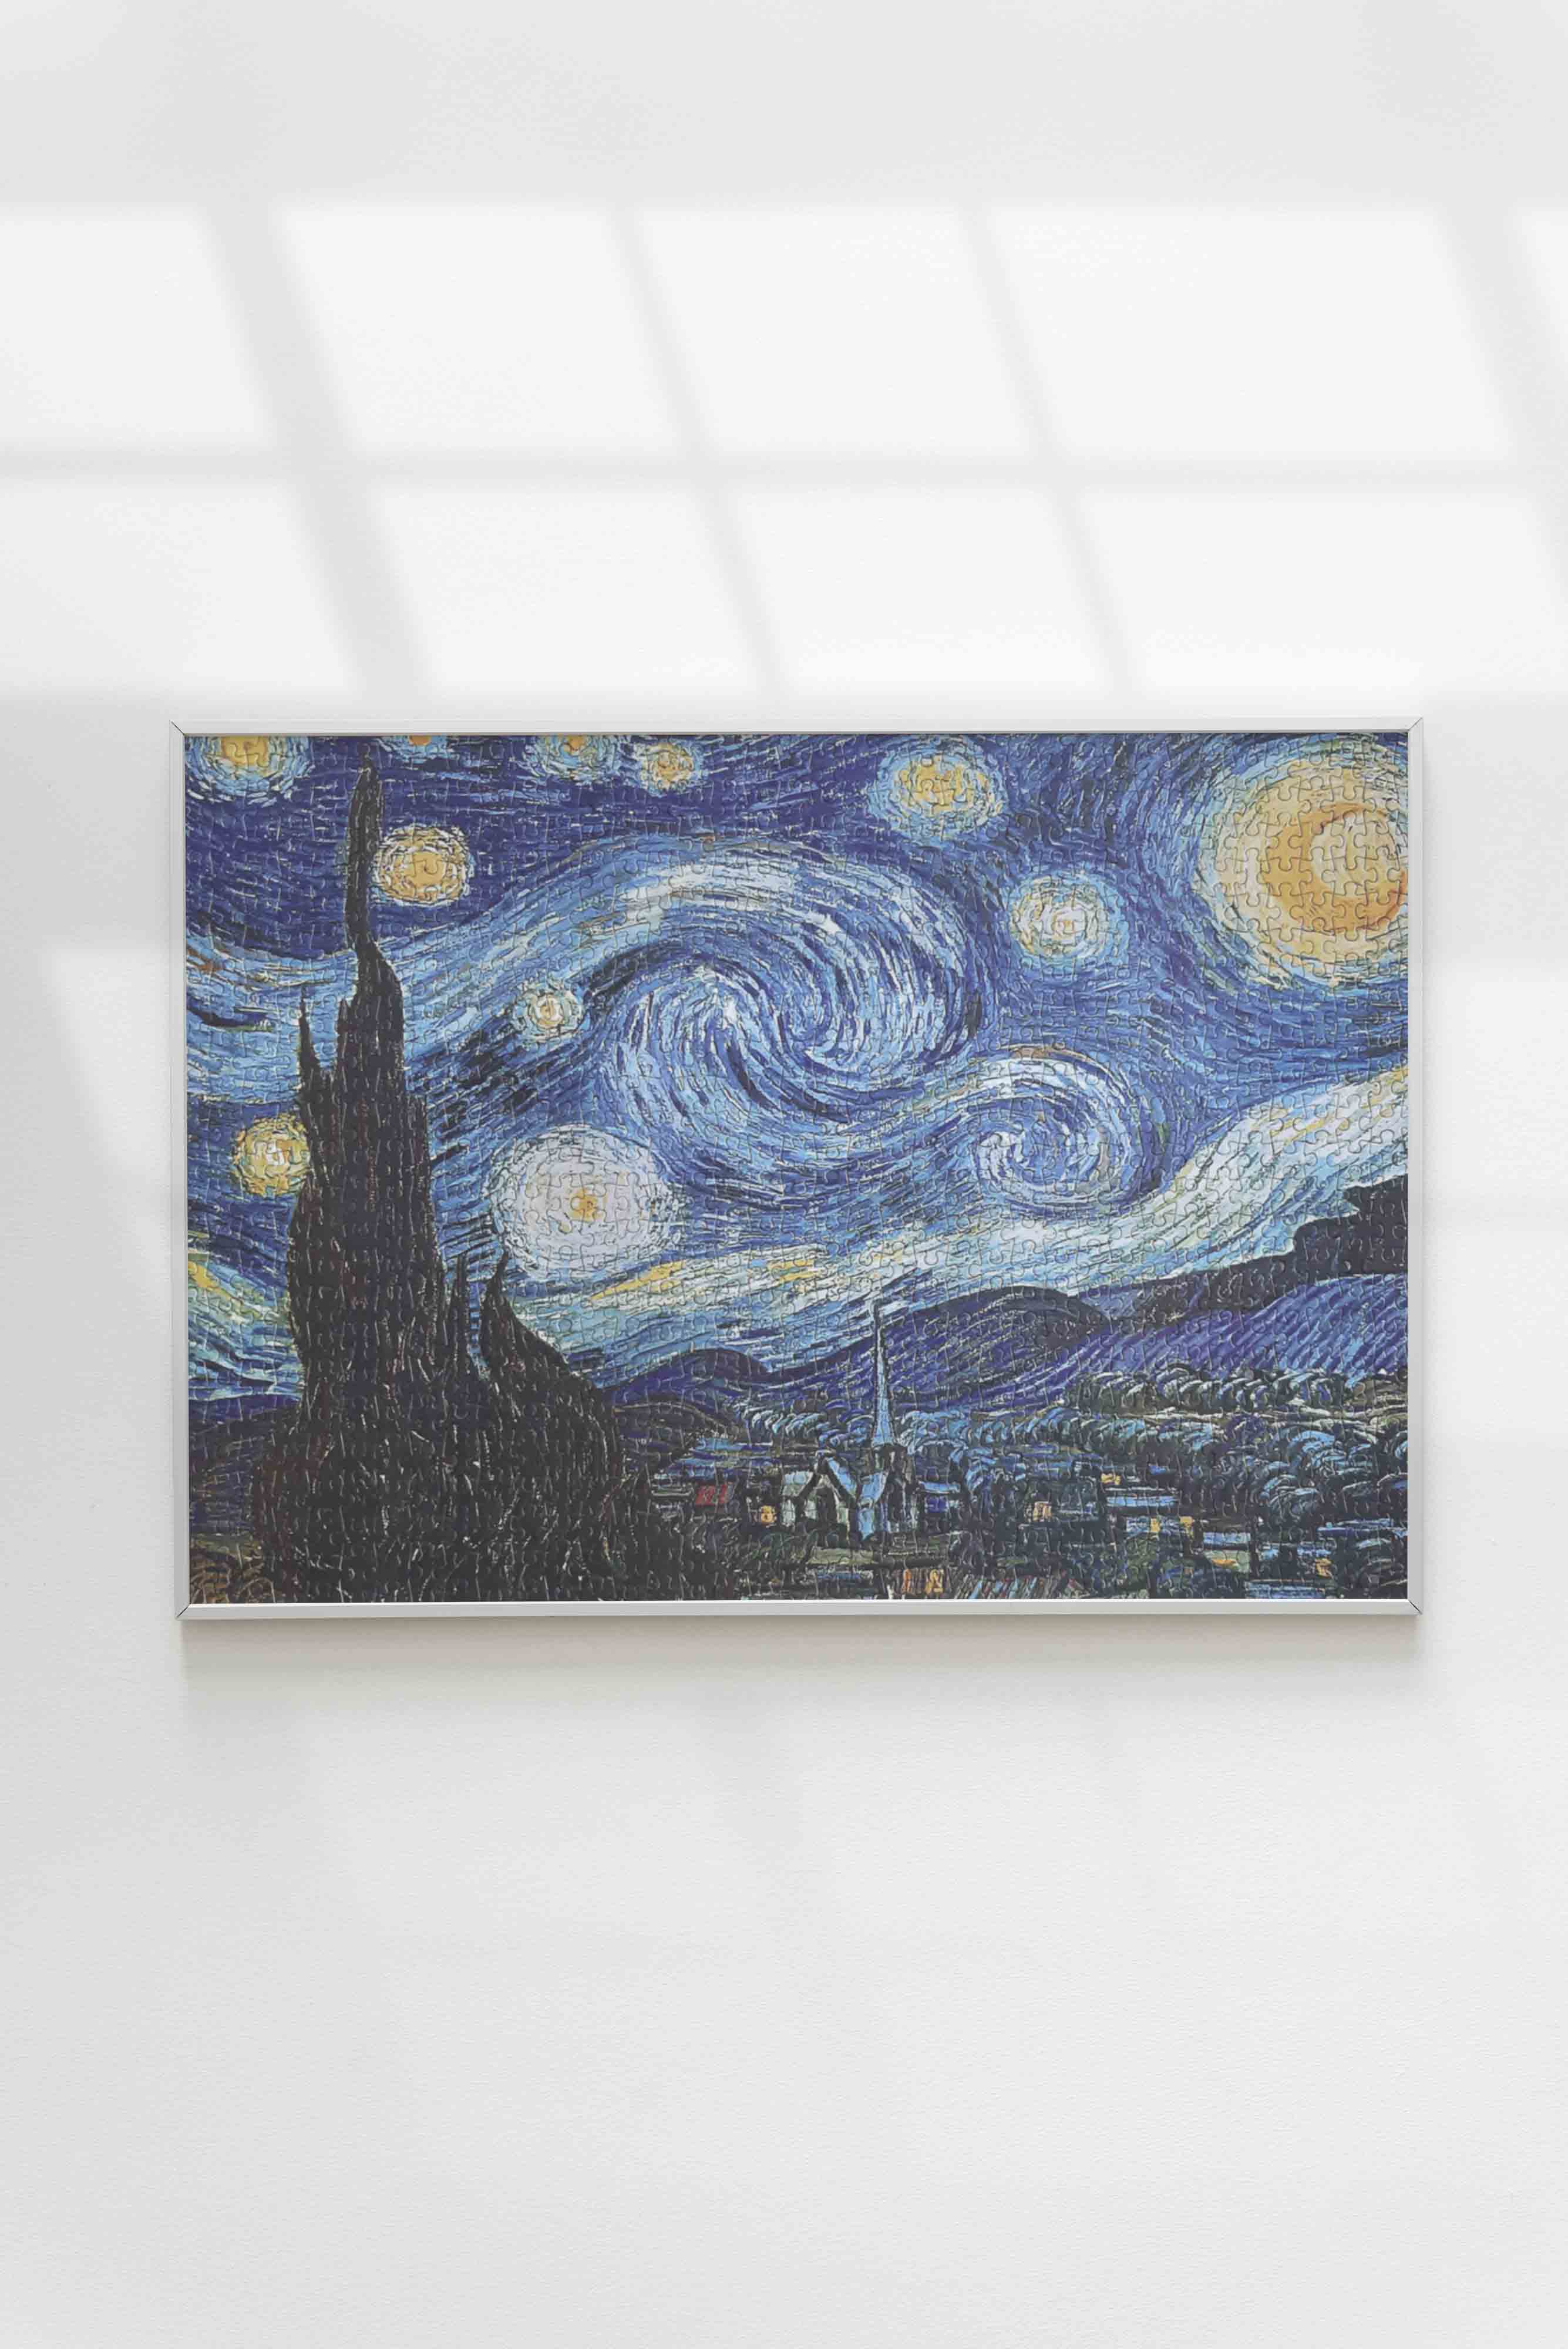 Vincent Van Gogh Starry Night Jigsaw Puzzle: 1000-Piece Puzzle Framed as Gallery Wall Art for Interior Design